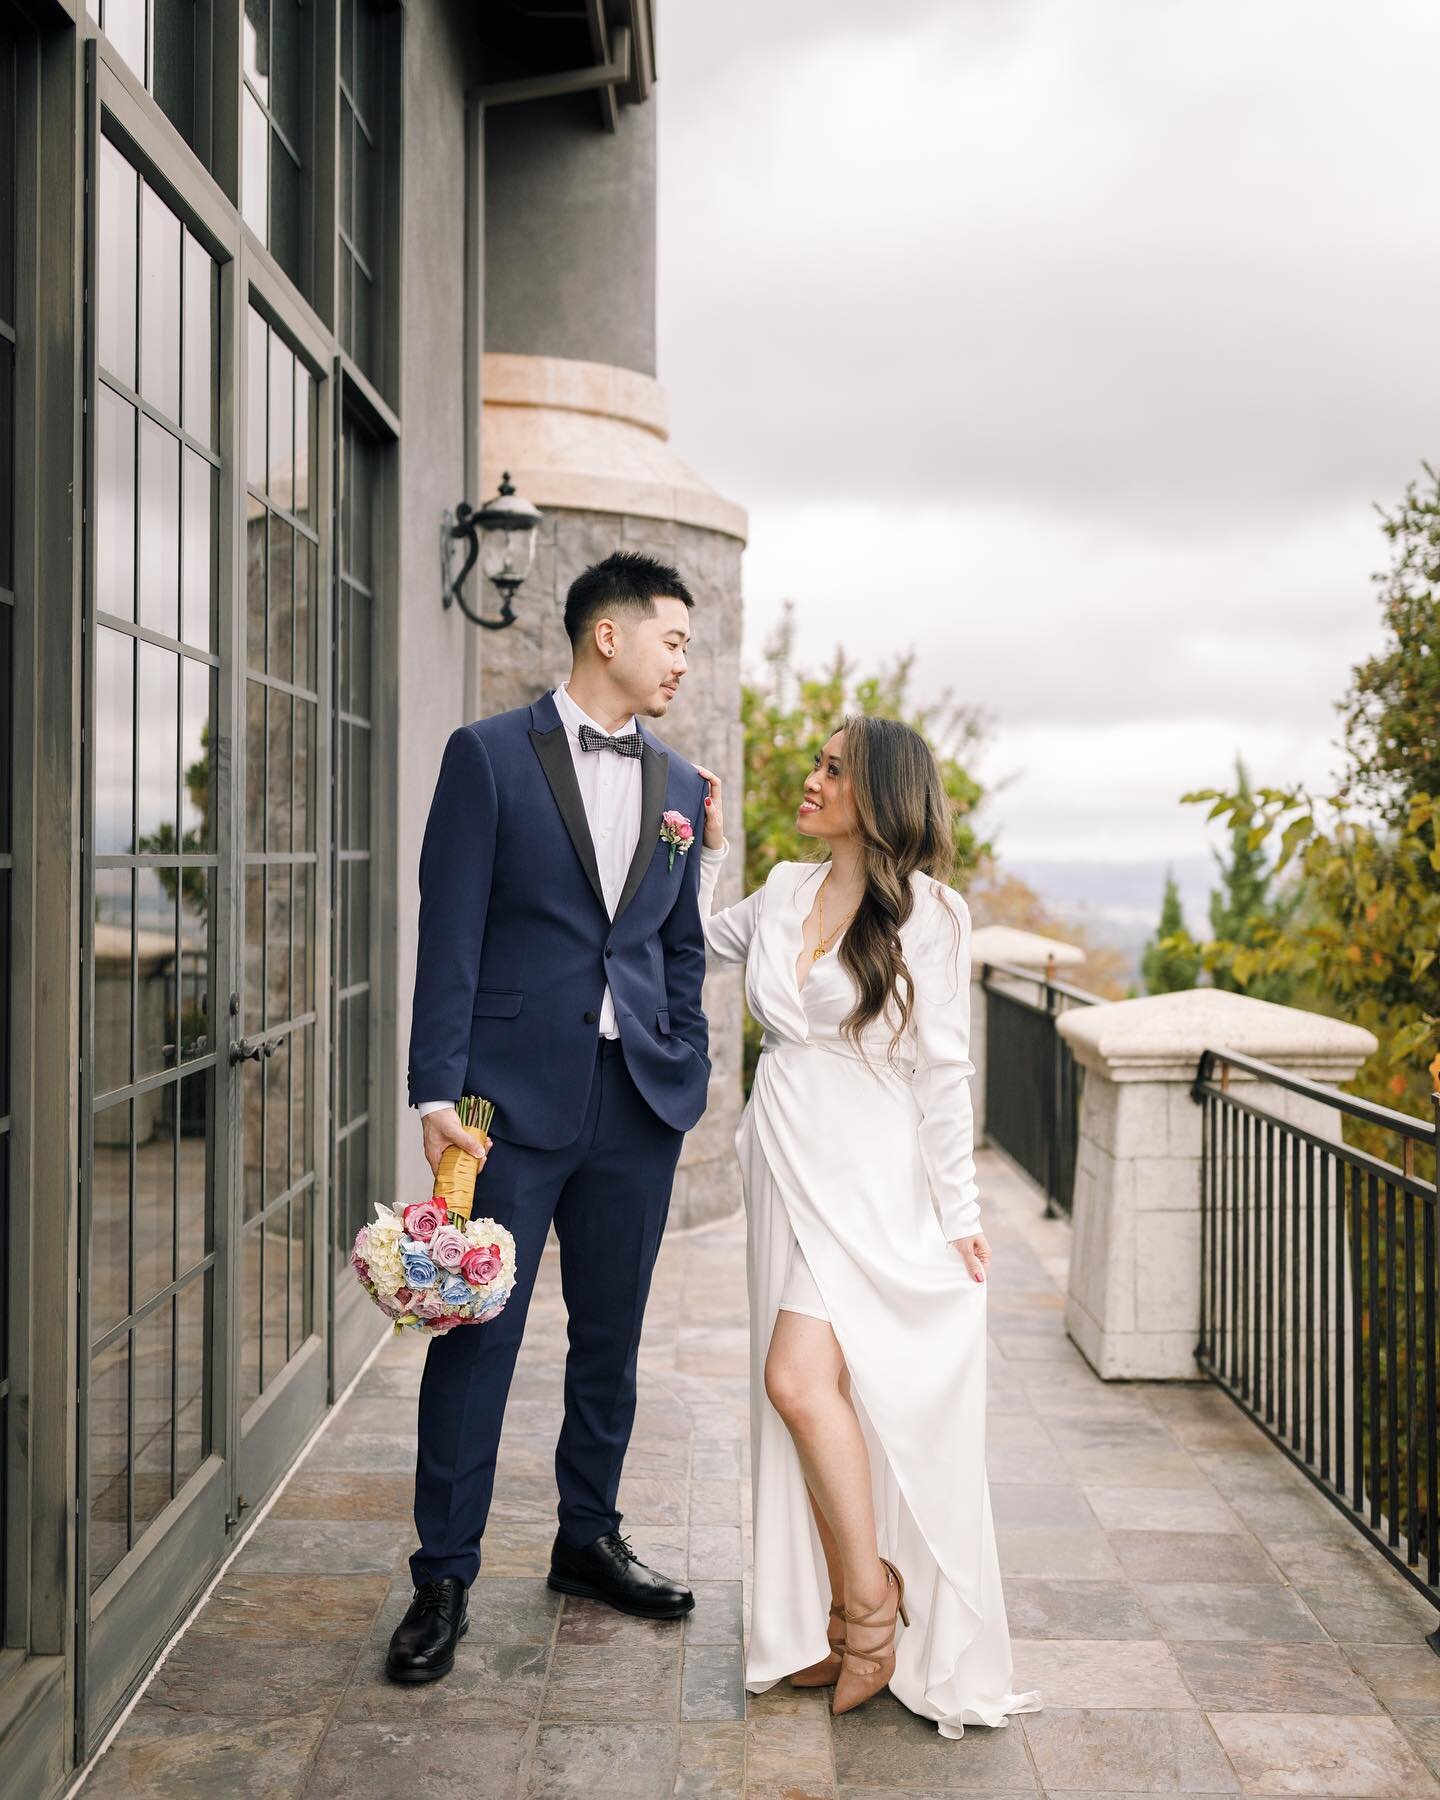 The new norm: intimate weddings

#sanfranciscoweddingphotographer #oaklandweddingphotographer #californiawedding #californiaelopement #intimatewedding #modernwedding #intimatewedding #backyardwedding